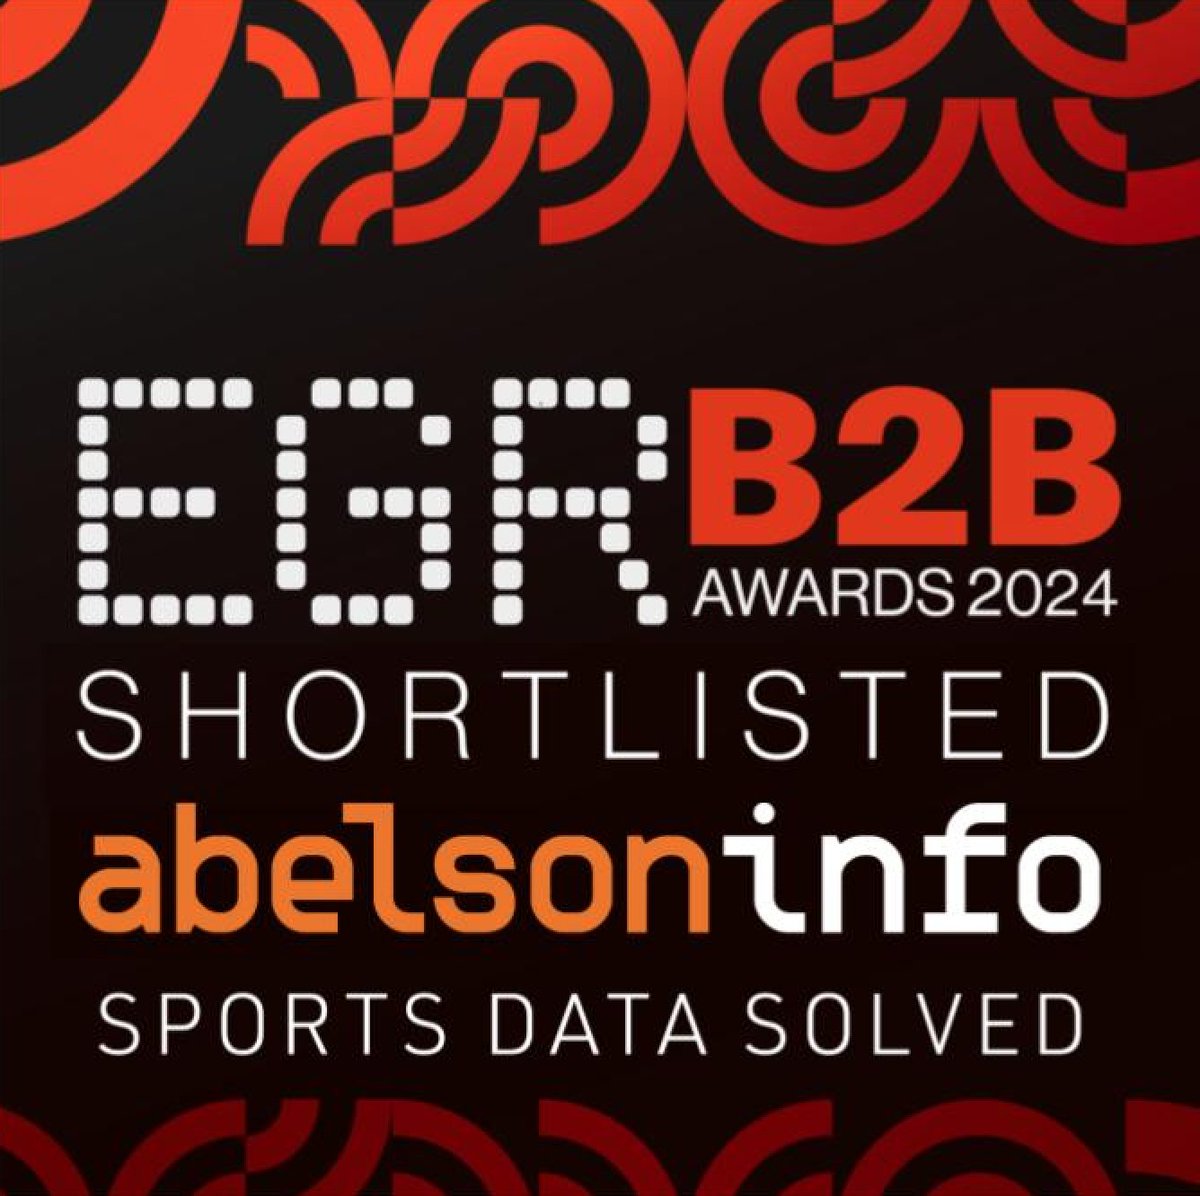 Real Recognise Real. The EGR B2B Awards celebrate the very best of the online gaming industry and we're proud to be shortlisted for three big awards this year!  

🏅Sports data supplier of the year
🏅Sports betting supplier of the year
🏅Best Innovation in sports betting software